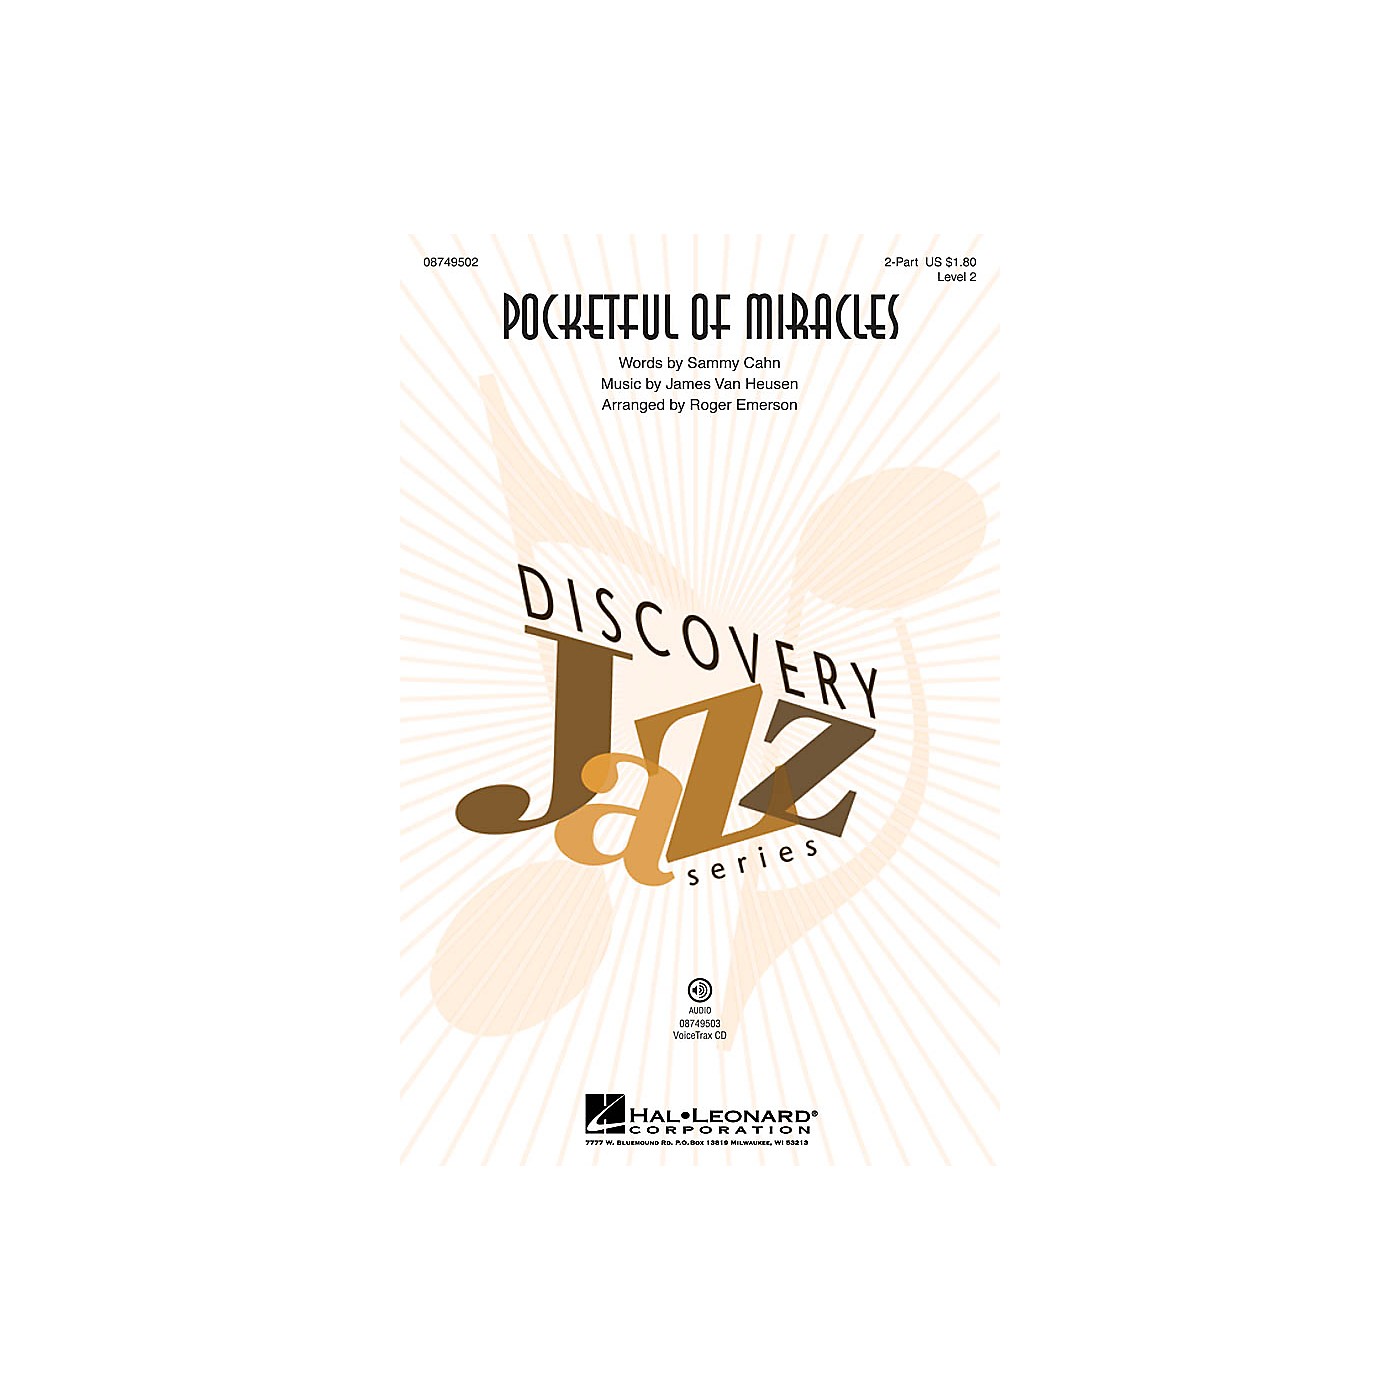 Hal Leonard Pocketful of Miracles (Discovery Level 2) 2-Part by Frank Sinatra arranged by Roger Emerson thumbnail